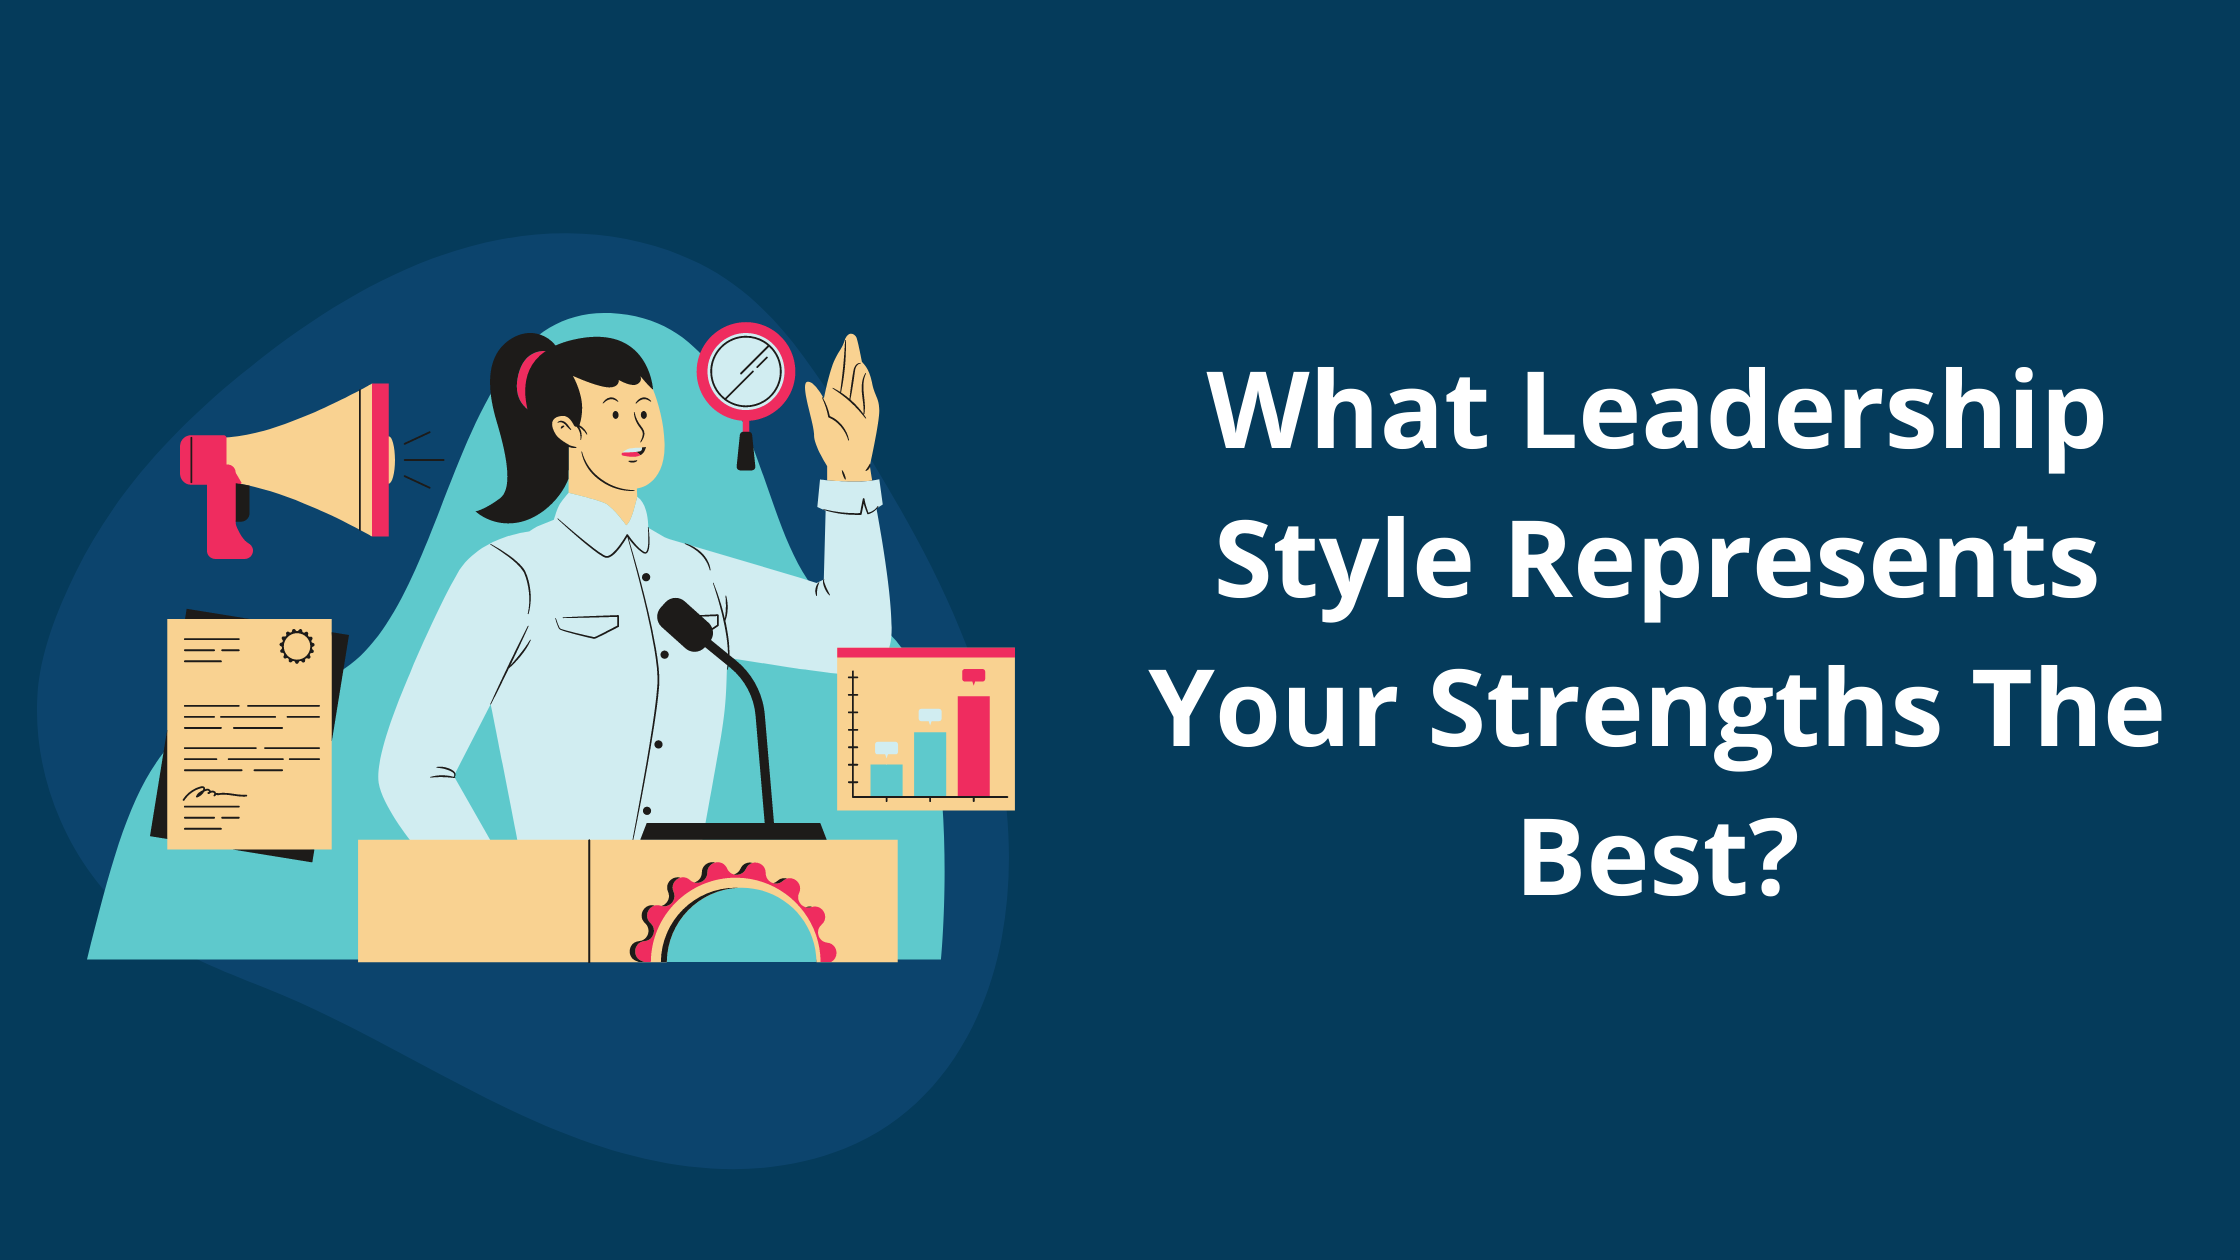 What Leadership Style Represents Your Strengths The Best?